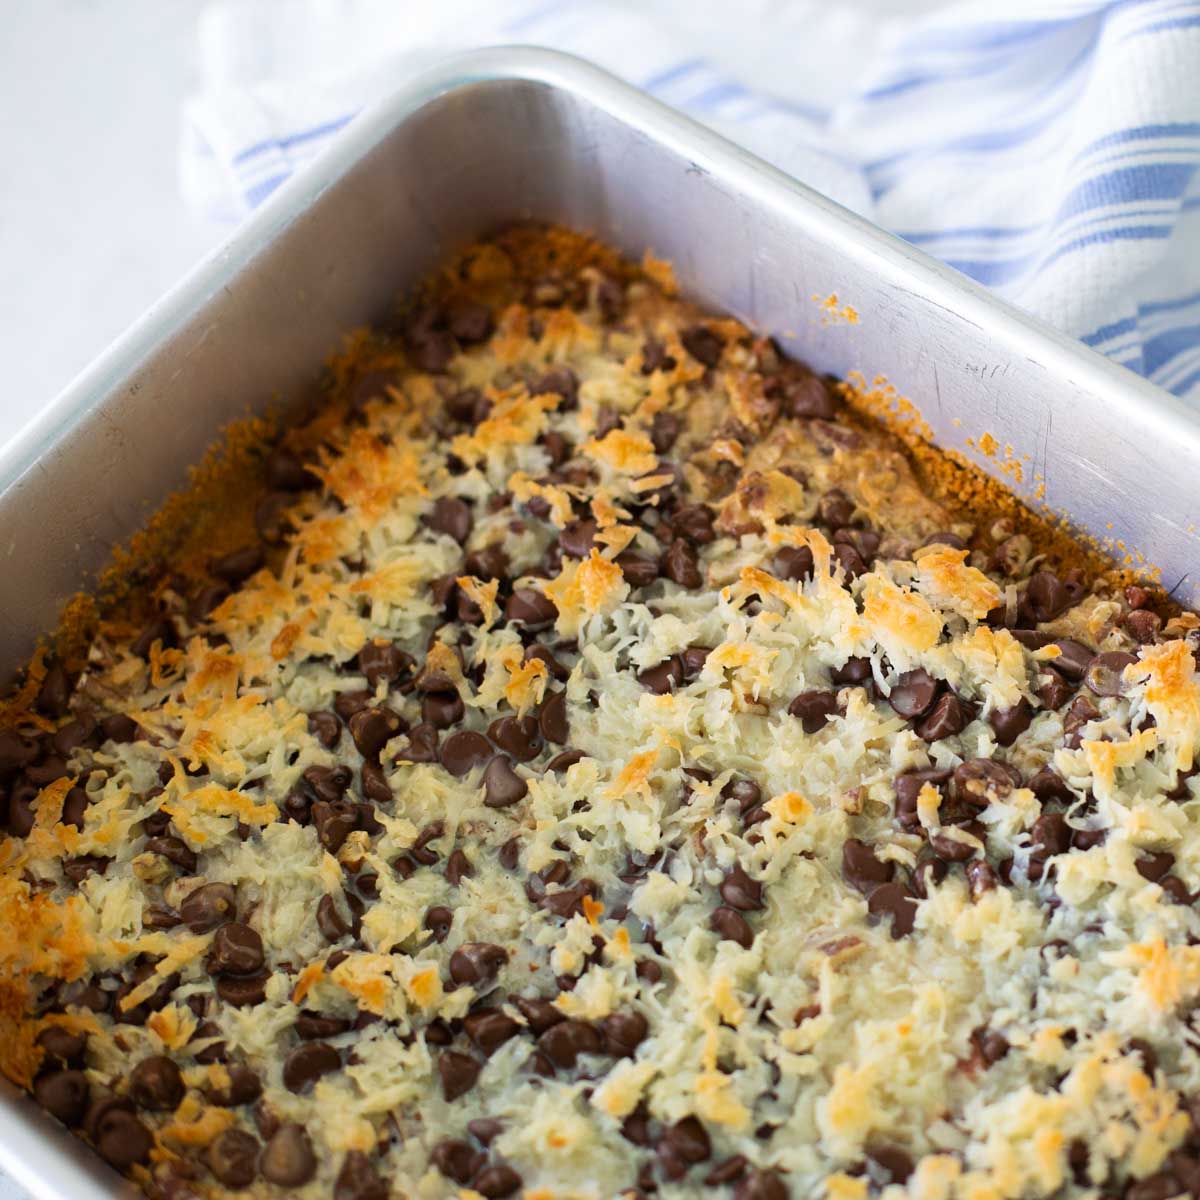 A metal baking pan is filled with hello dolly bars topped with shredded coconut and chocolate chips.